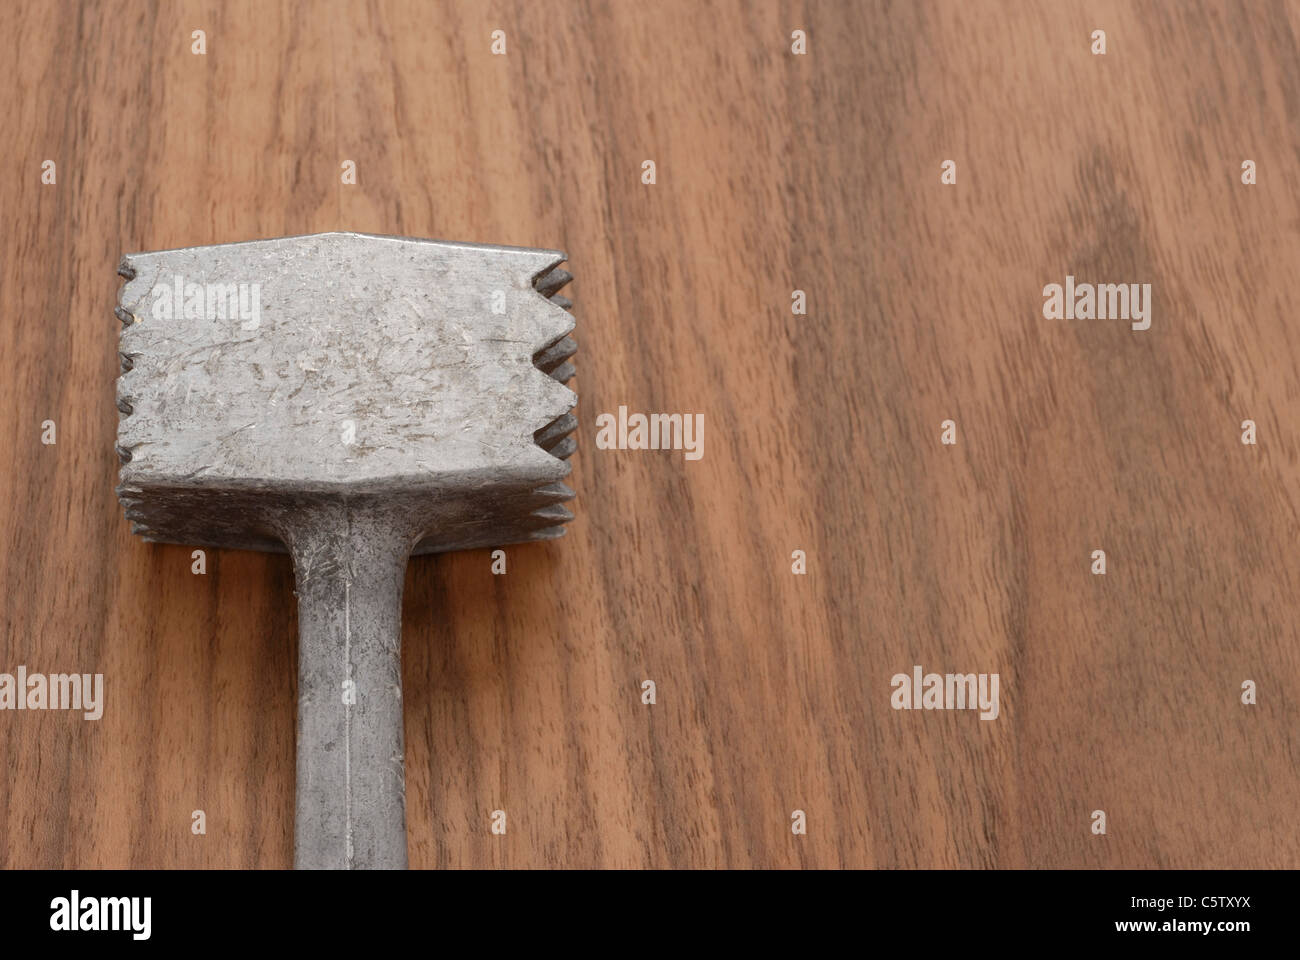 Meat tenderizer on wooden table, elevated view Stock Photo